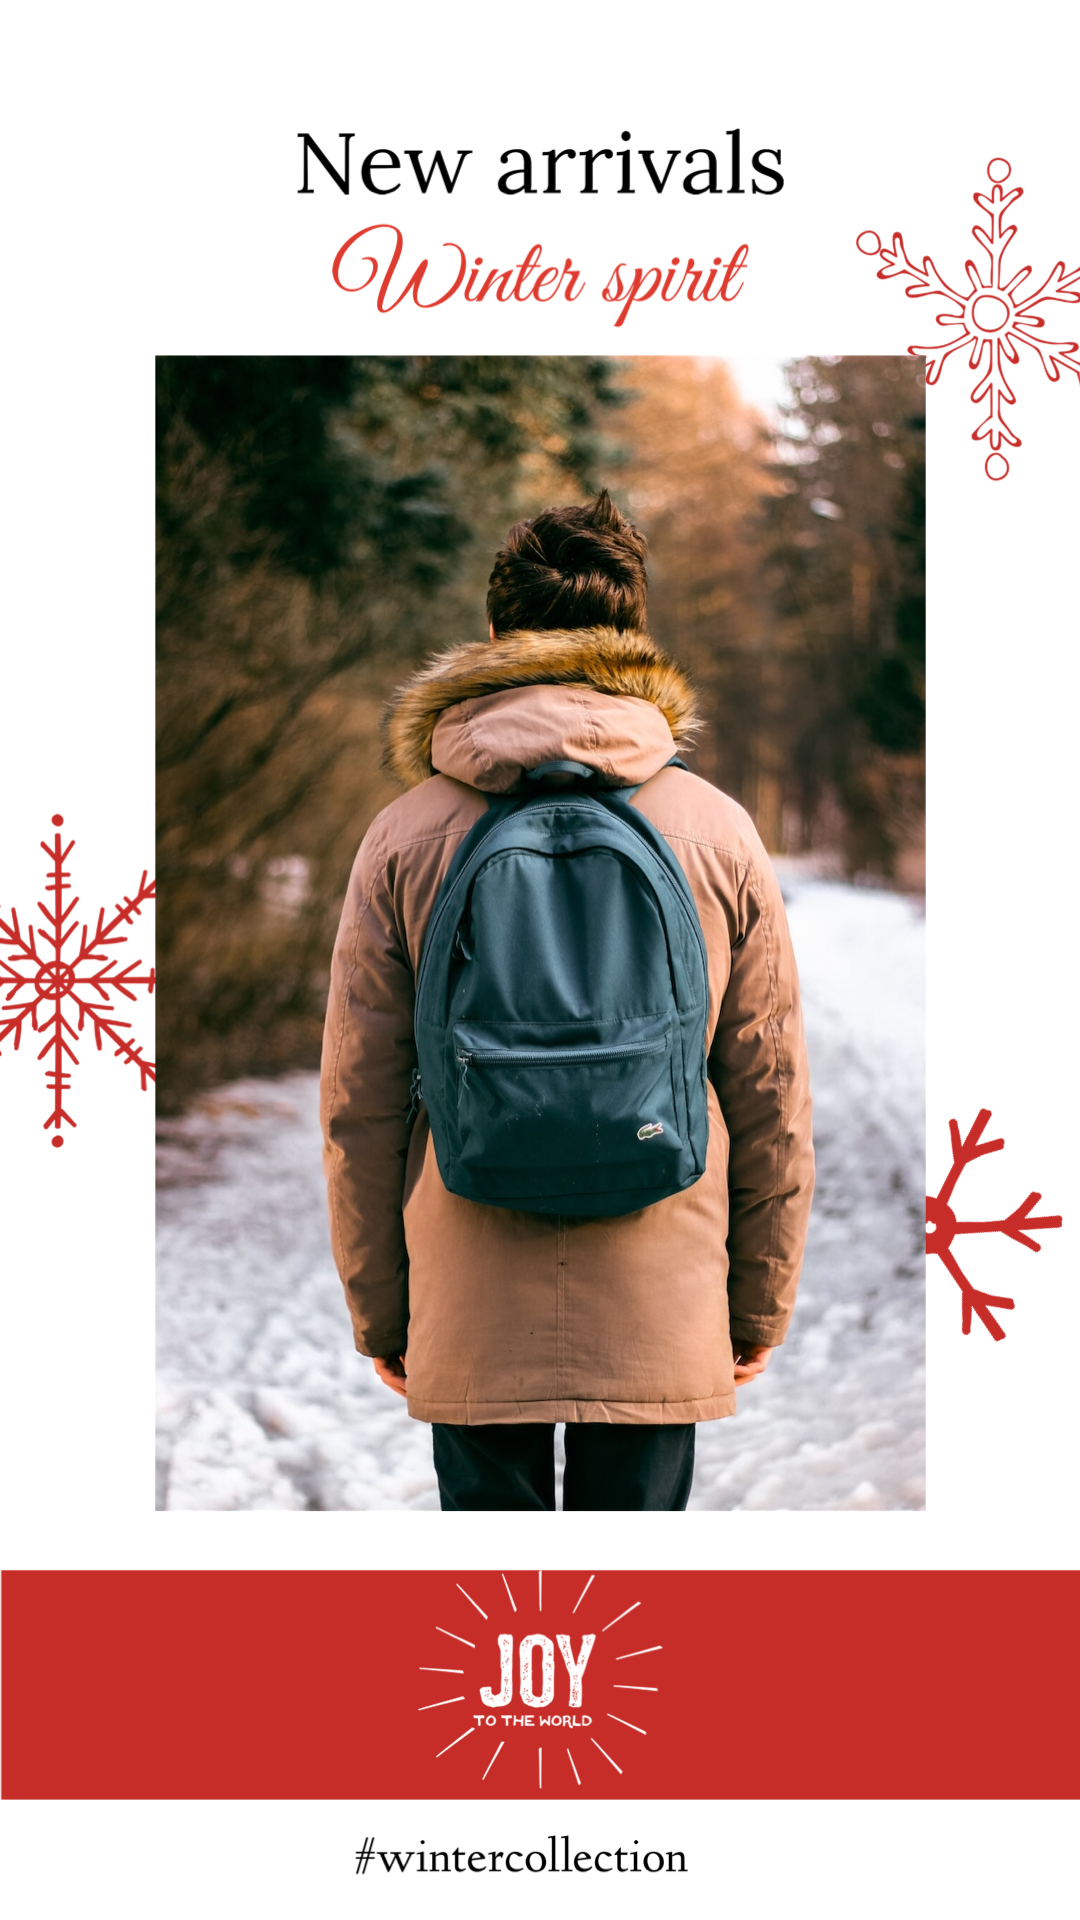 New Arrivals Winter Spirit Person With A Backpack Walking In The Snow Template